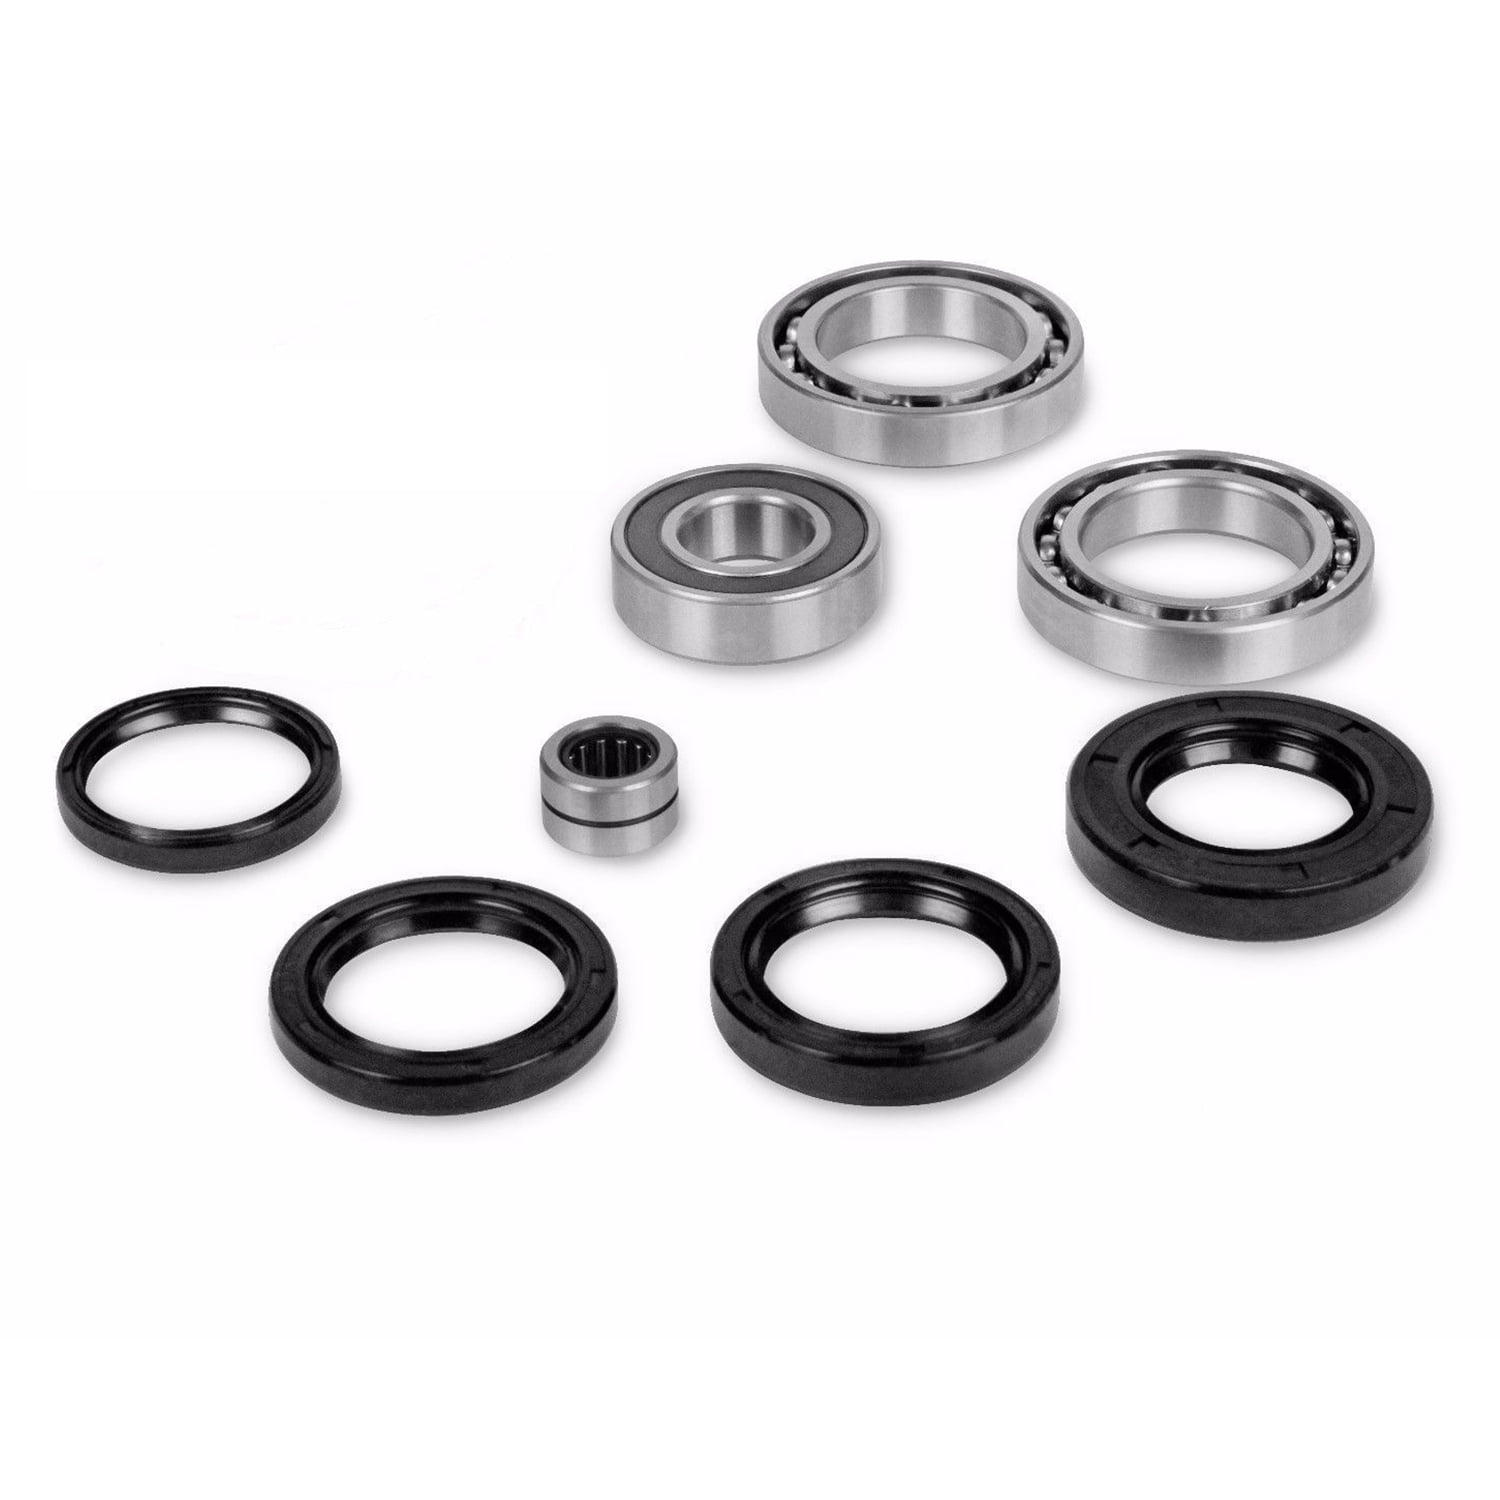 Arctic Cat 300 4x4 Front Differential Seal Kit 1998-2001